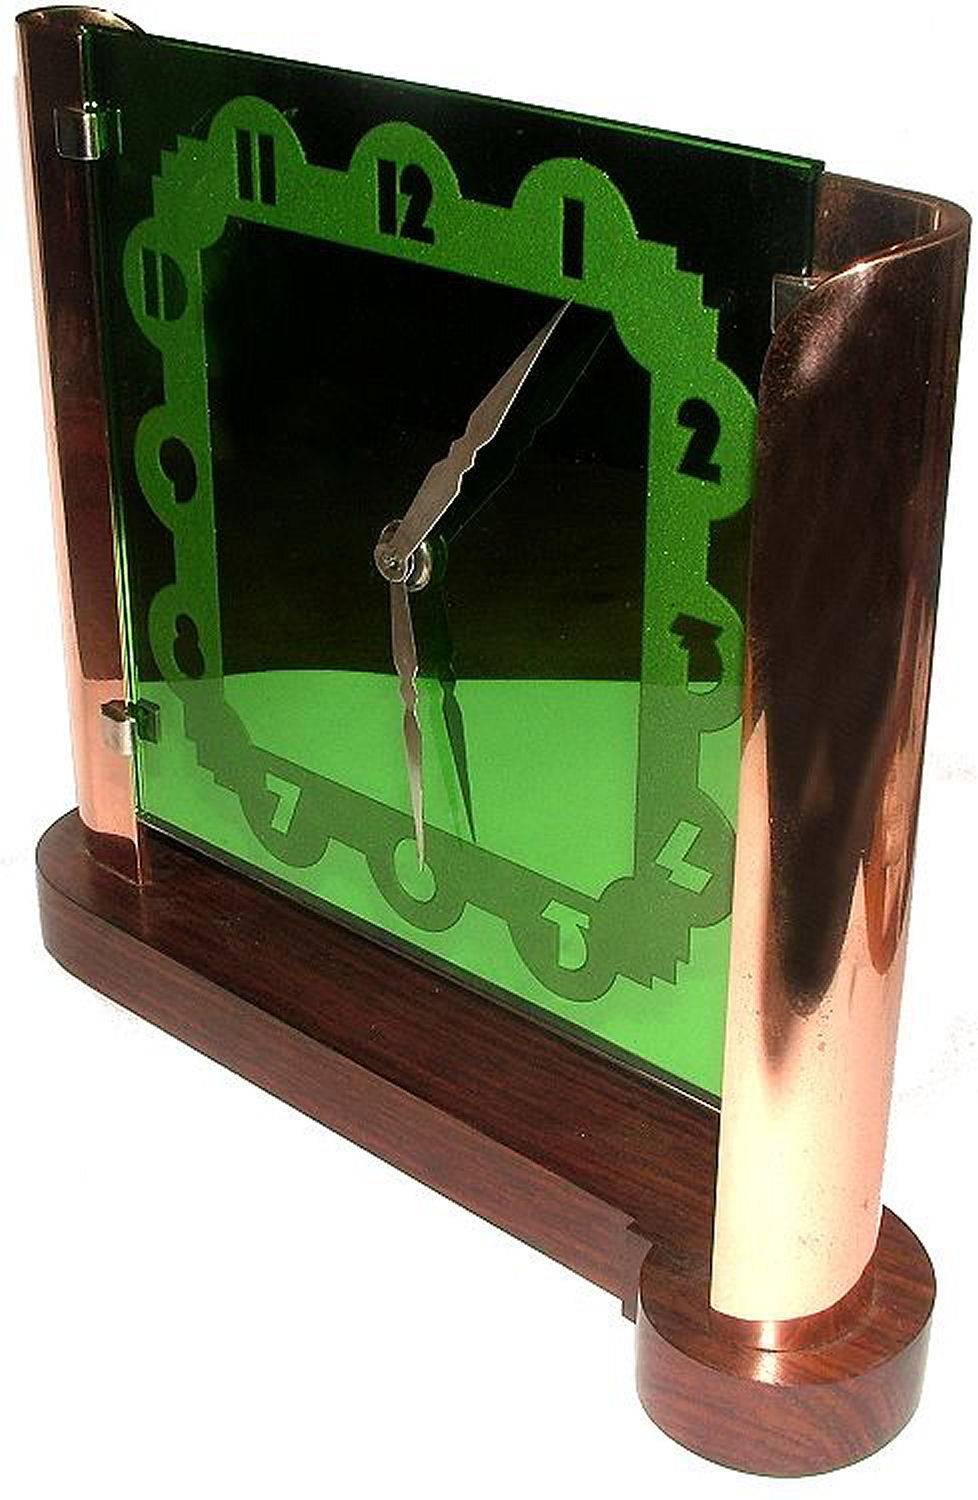 Very large and very rare Art Deco streamline modernist clock.

Aside the appearance and super rarity of this marvellous clock on first viewing, one can't be distracted away from the condition of the clock as well, which for it's 90 odd years is